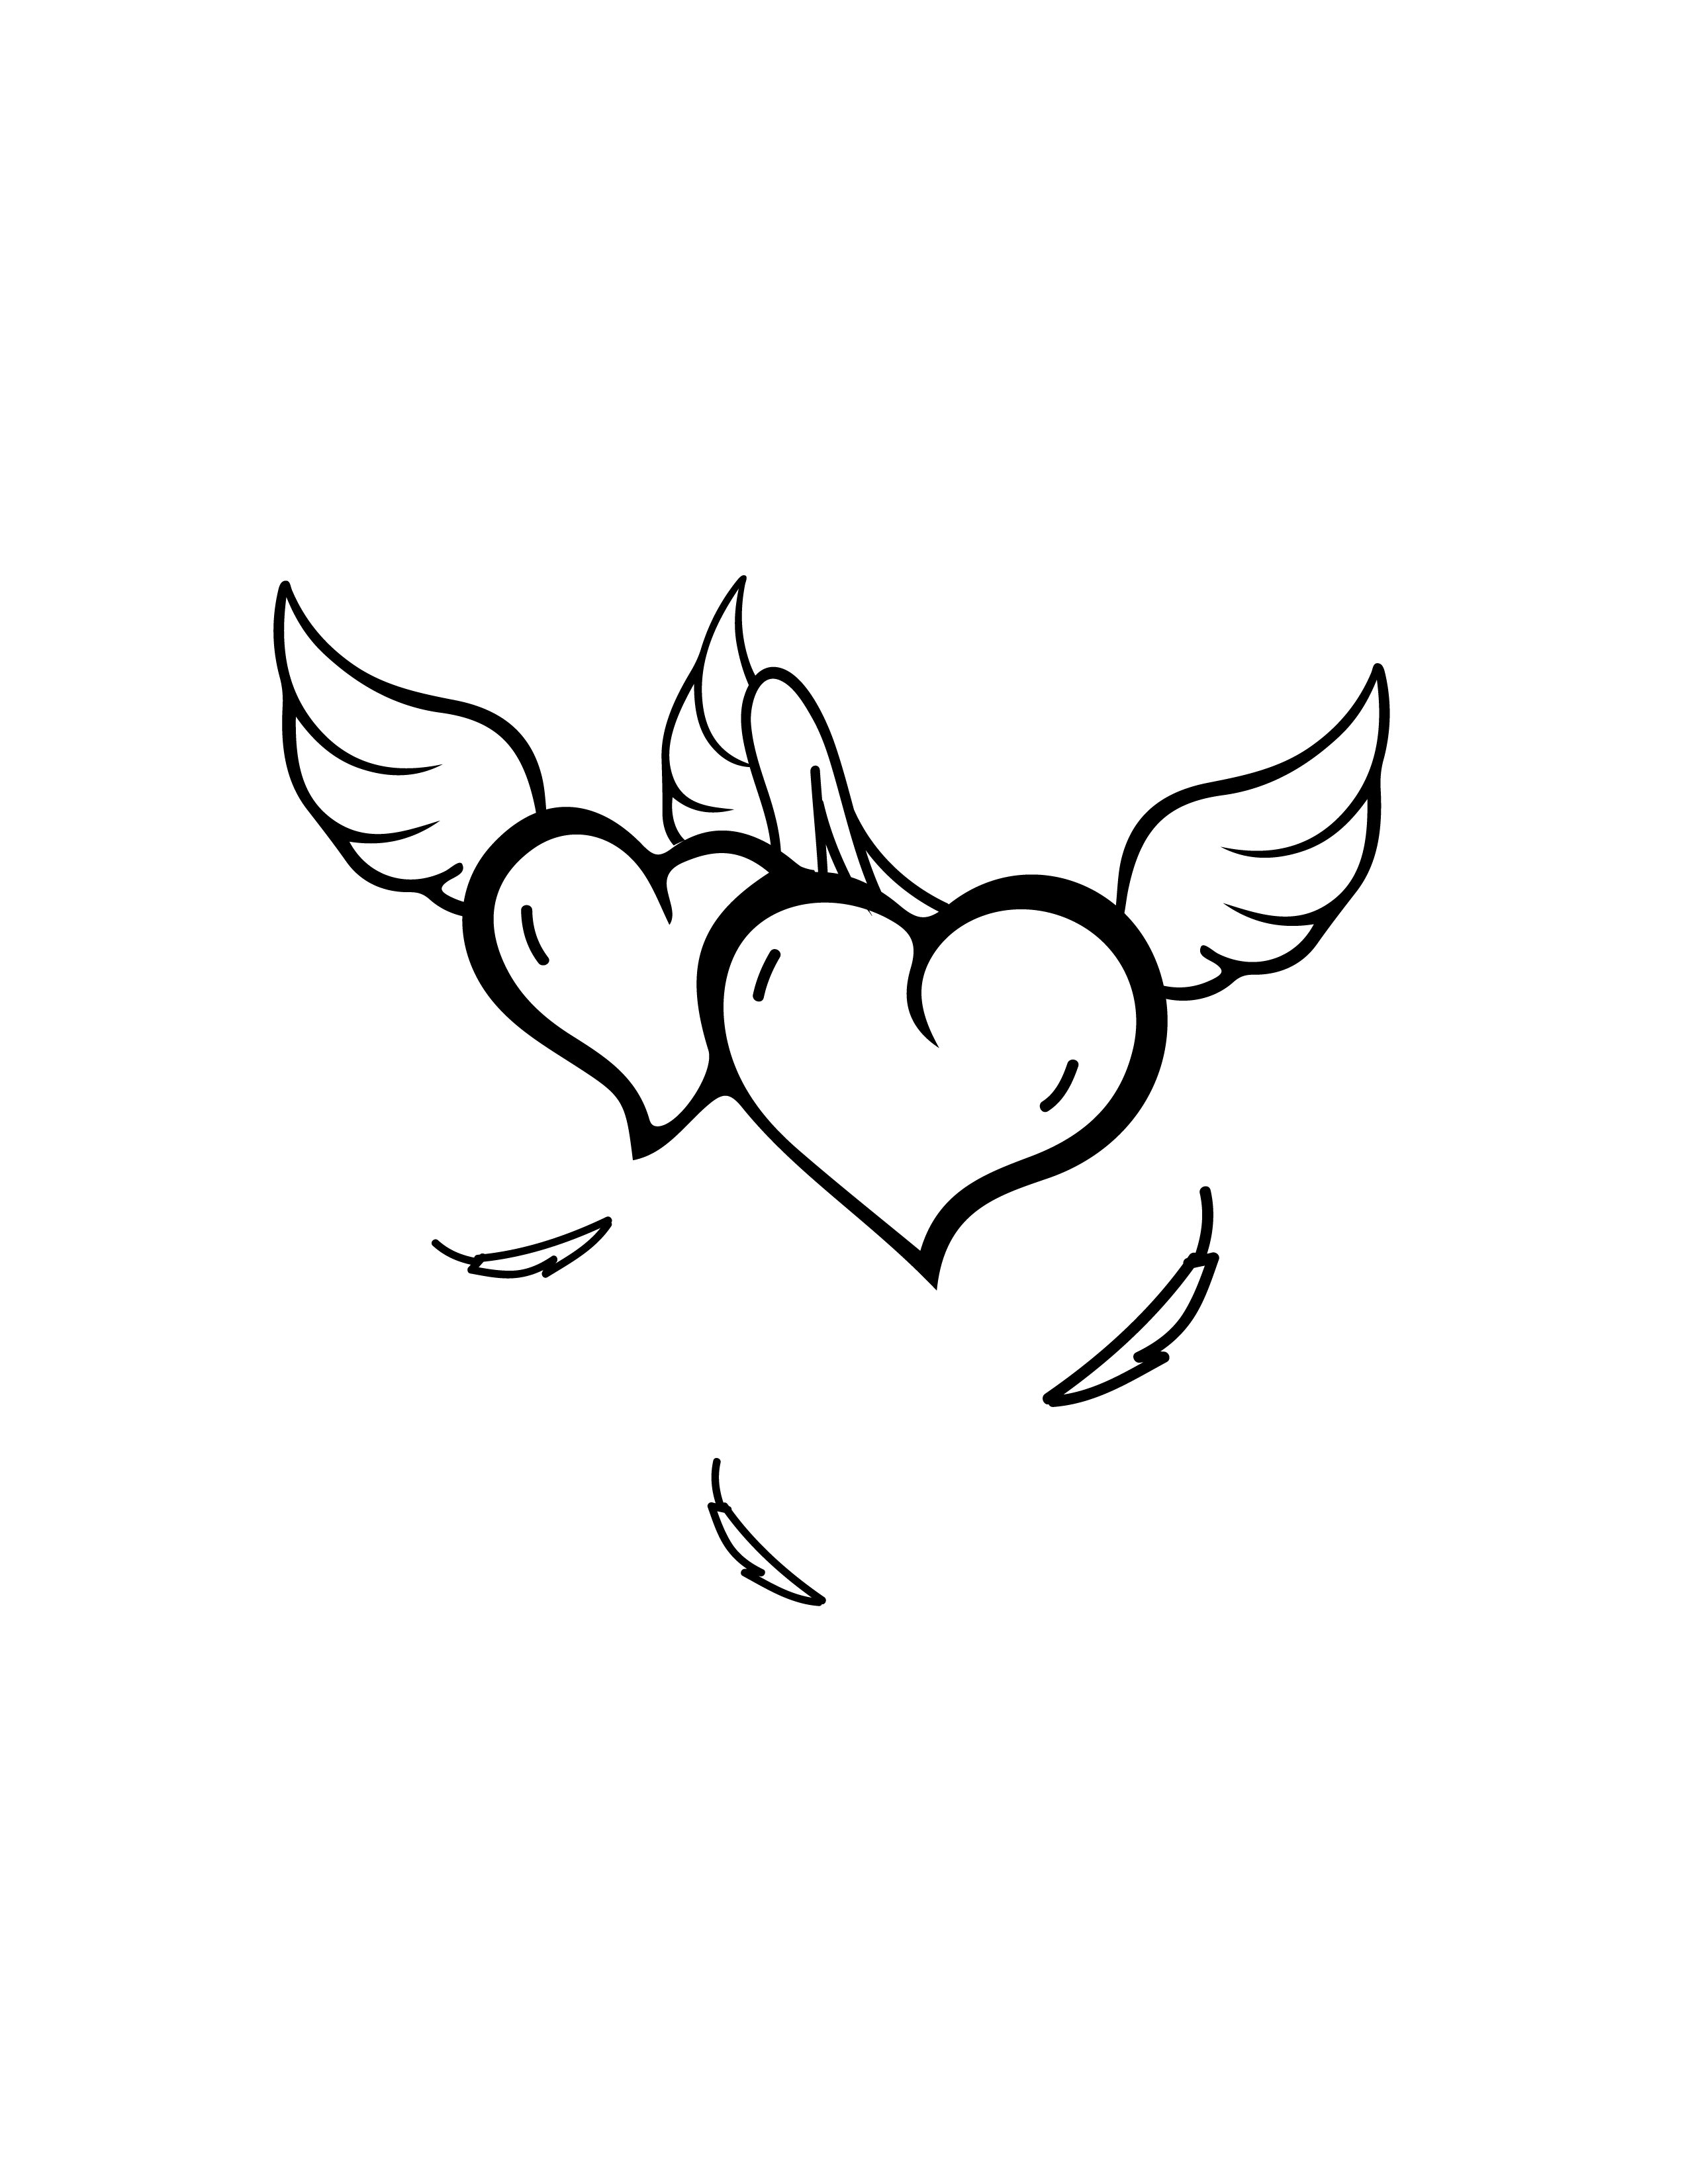 How to Draw a Heart with Wings  Tribal Tattoo Design  YouTube